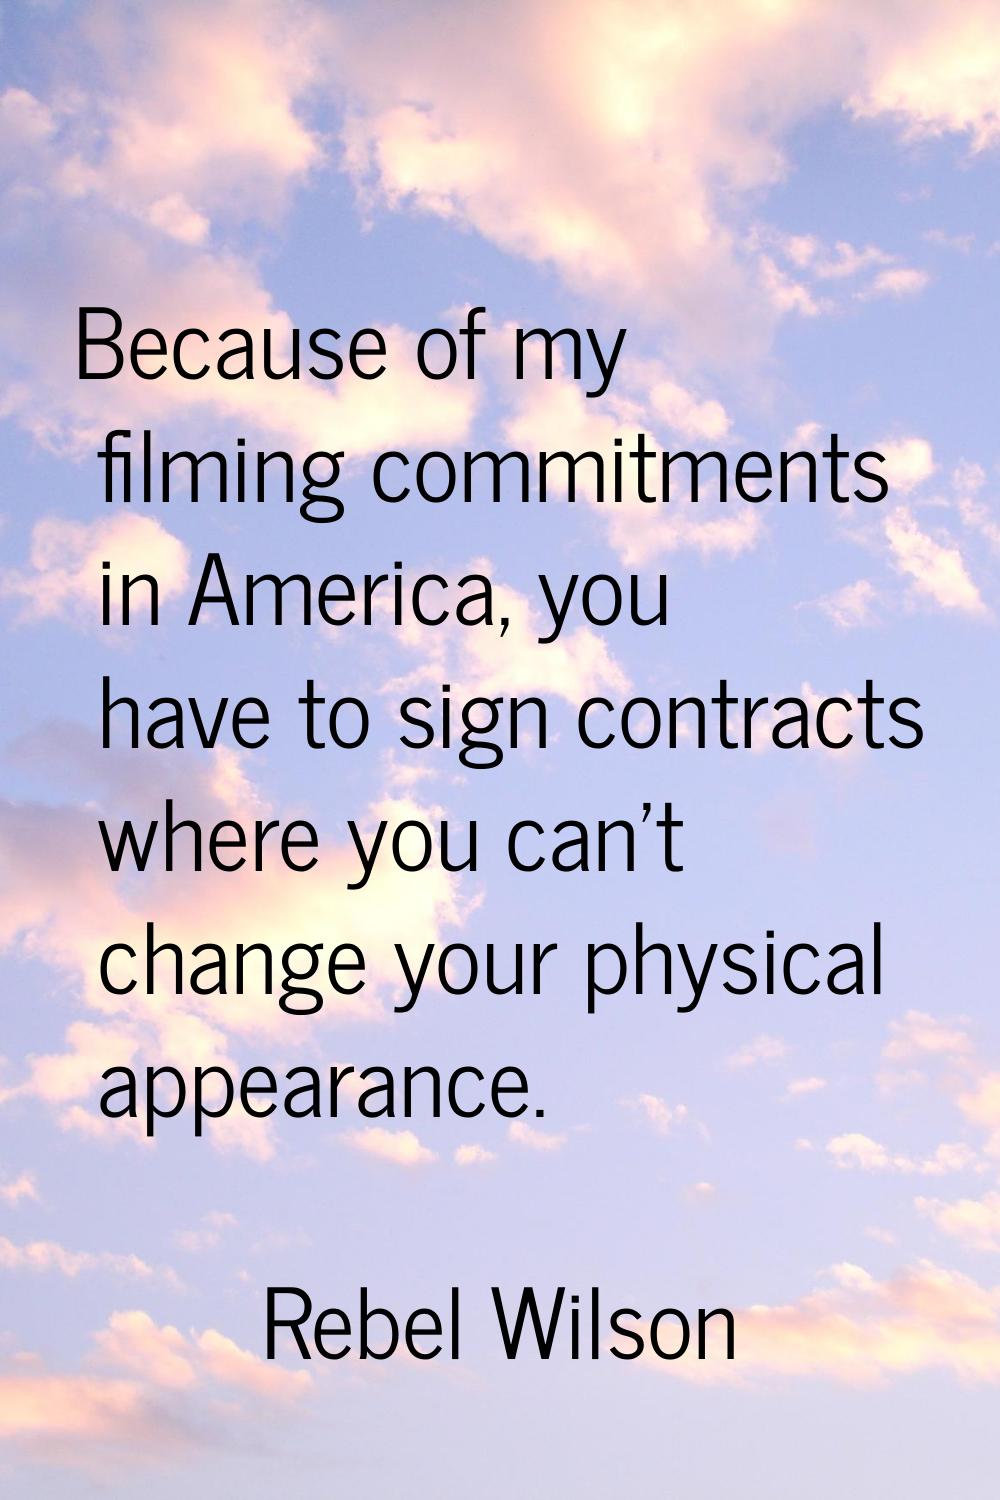 Because of my filming commitments in America, you have to sign contracts where you can't change you